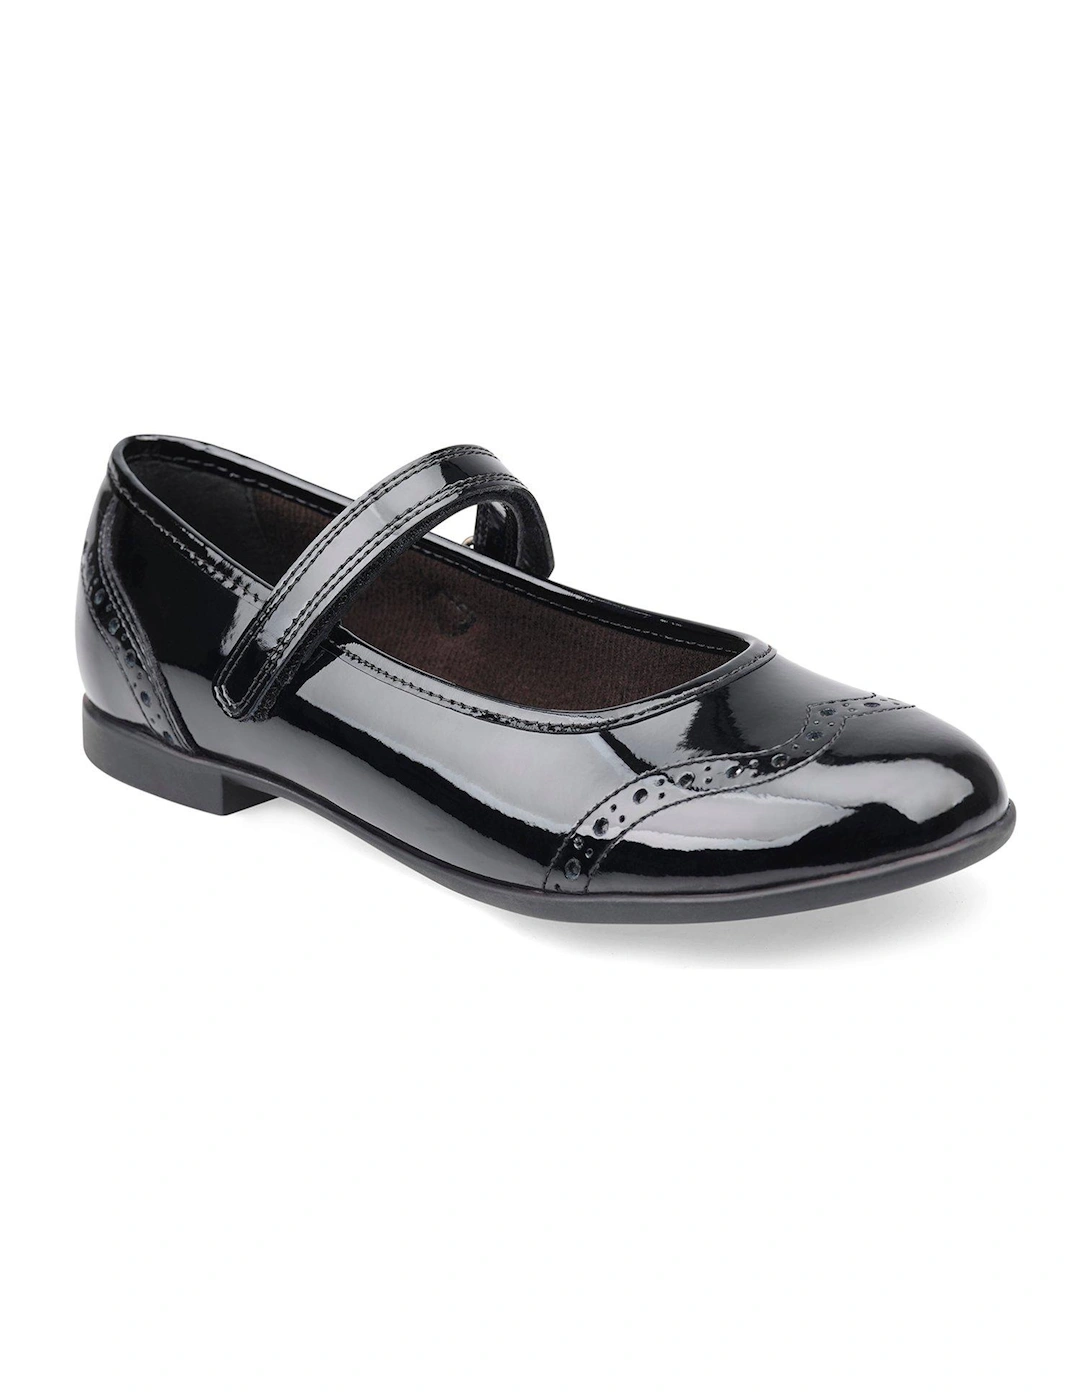 Impress Patent Leather Girls Mary Jane School Shoes - Black, 2 of 1